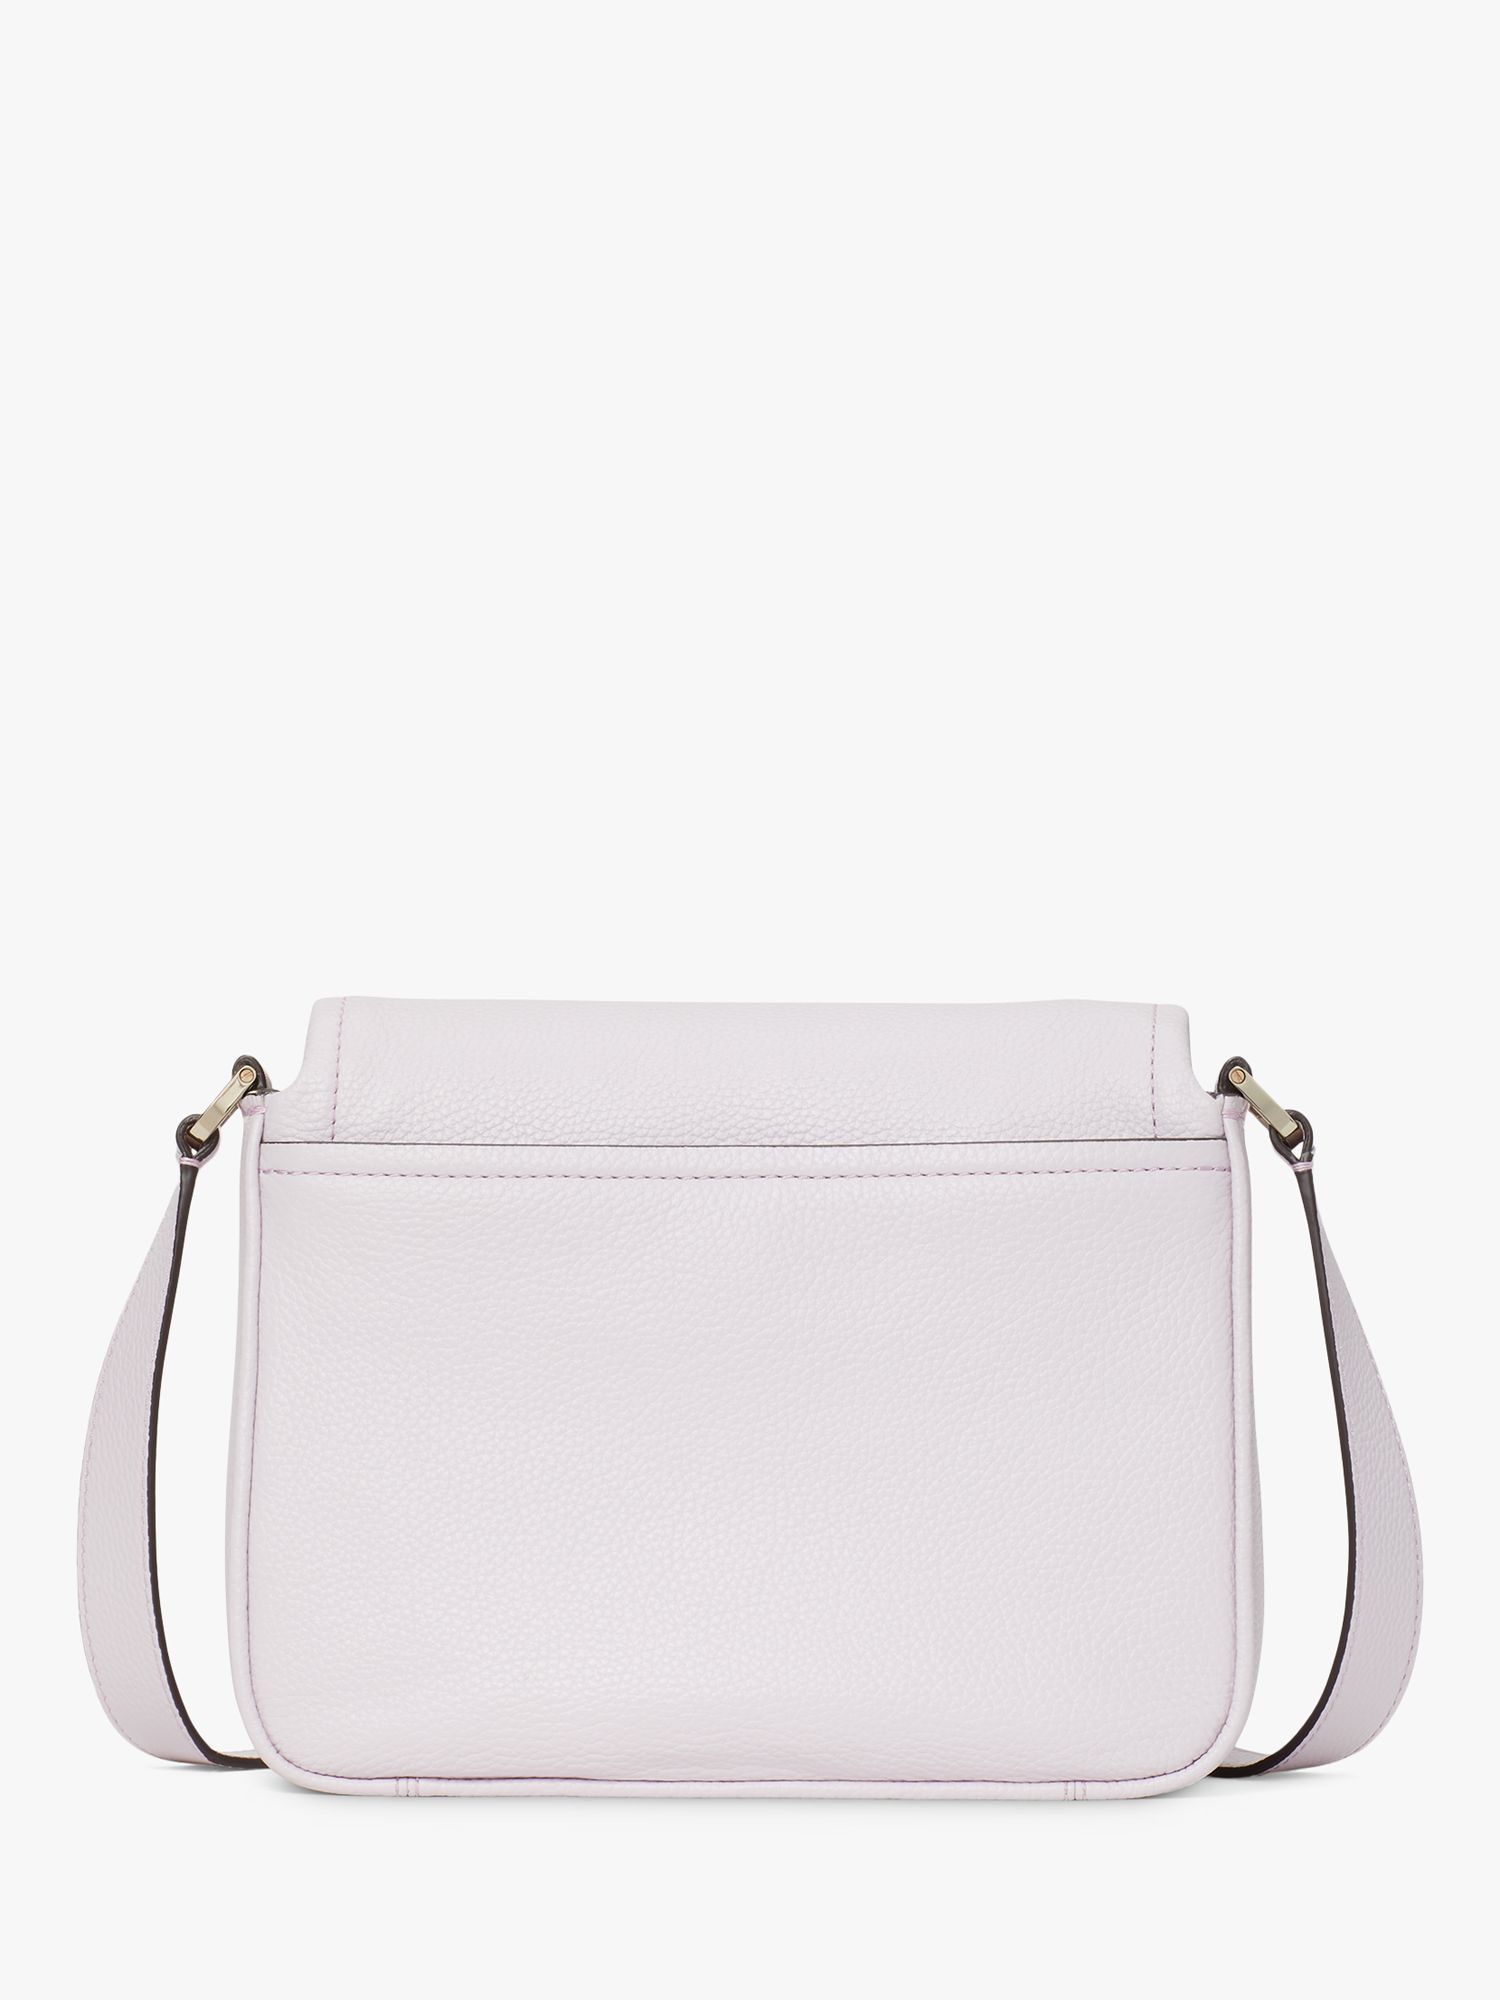 kate spade new york Run Around Flap Over Leather Cross Body Bag, Lilac ...